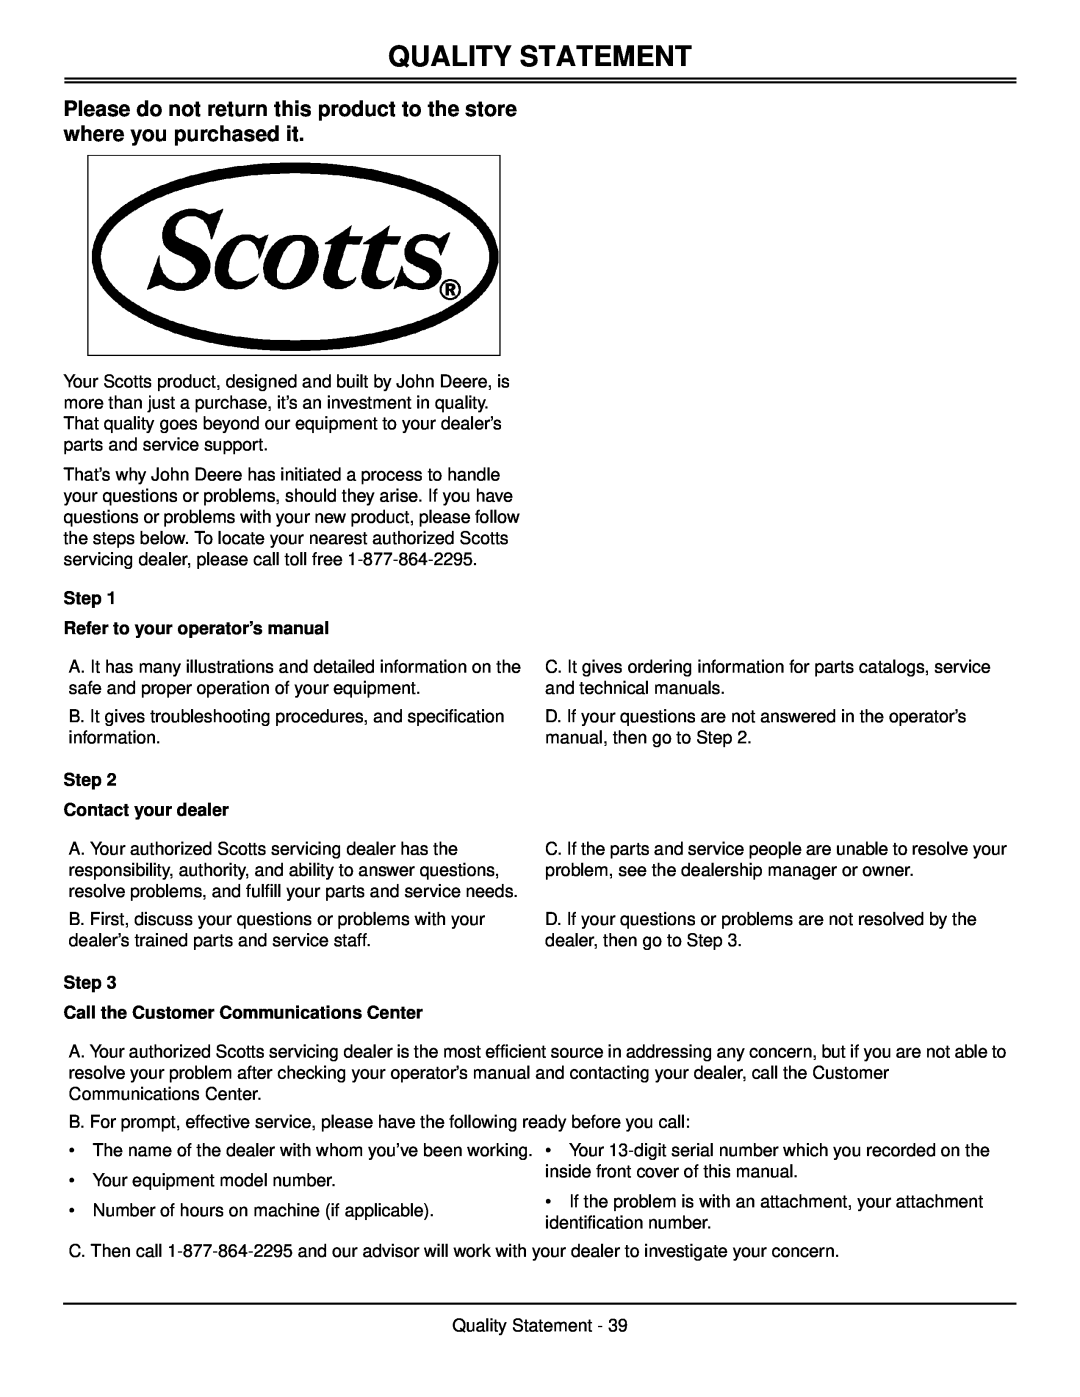 Scotts SP6211, SP6213 manual Quality Statement, Please do not return this product to the store where you purchased it 